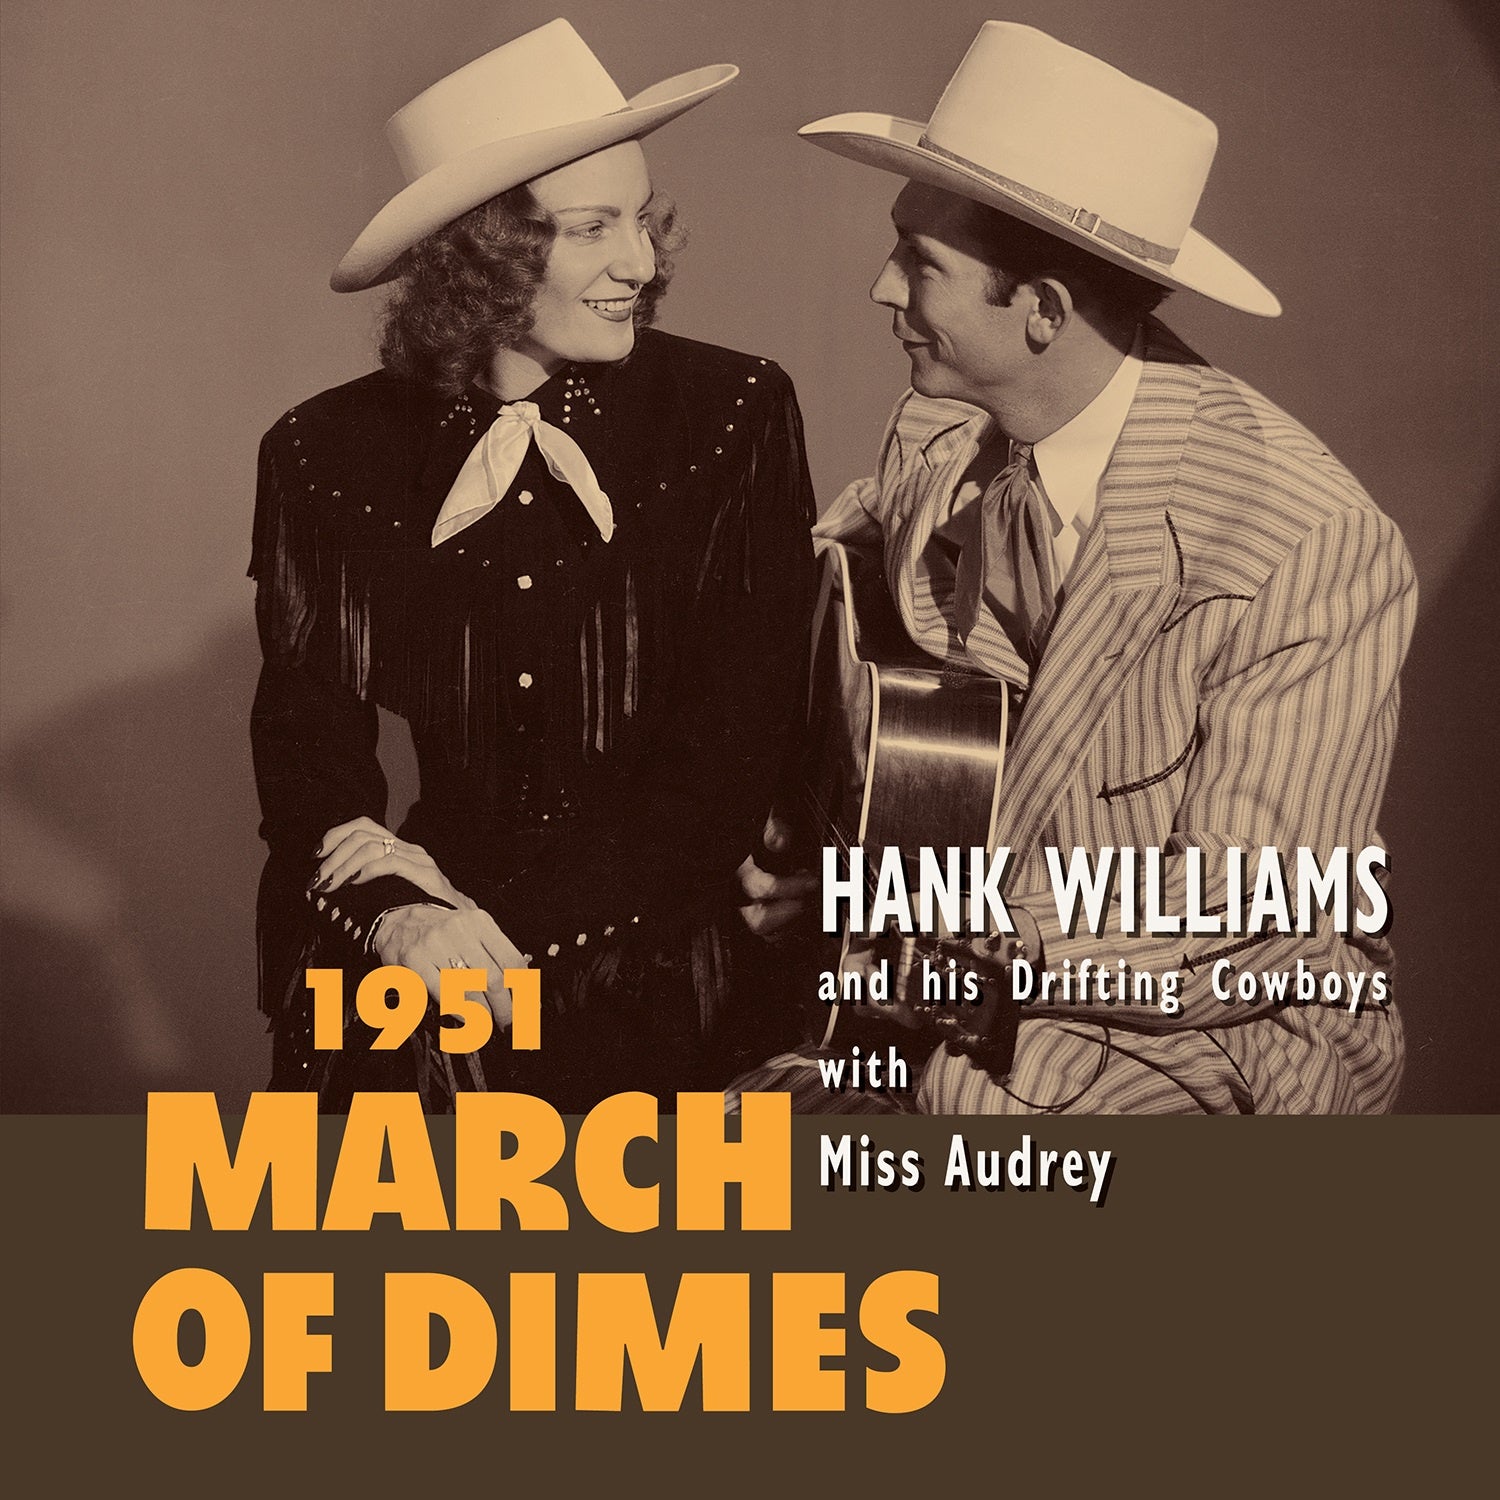 Hank Williams - March Of Dimes (1951) - New 10" Lp Record Store Day 2020 BMG Europe Import RSD Red Vinyl - Country